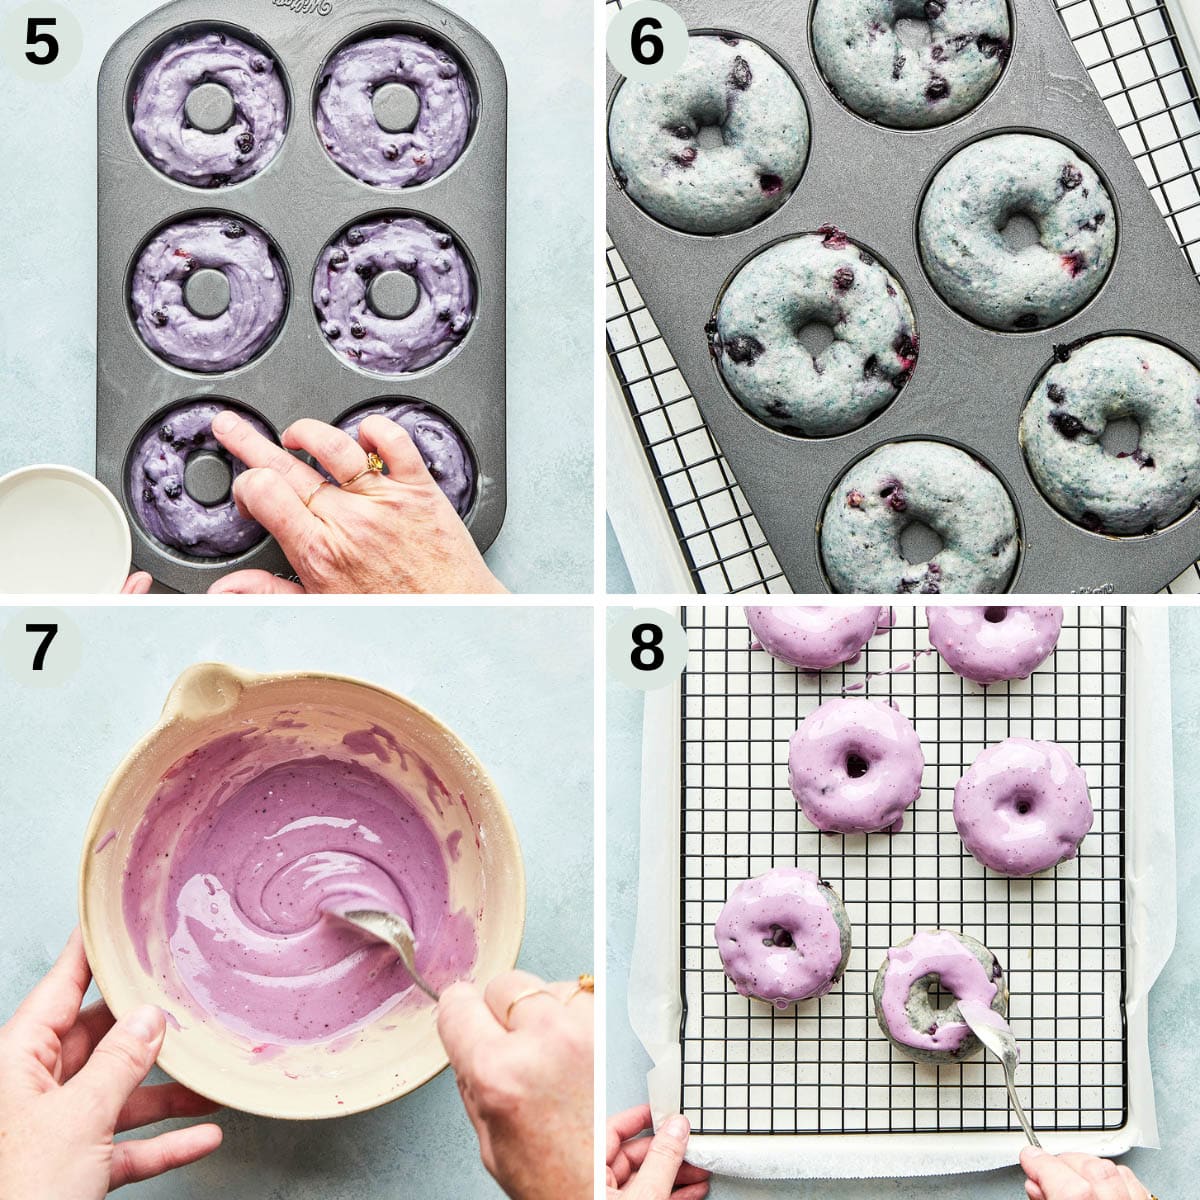 Process shots 5 to 8 to make blueberry donuts.